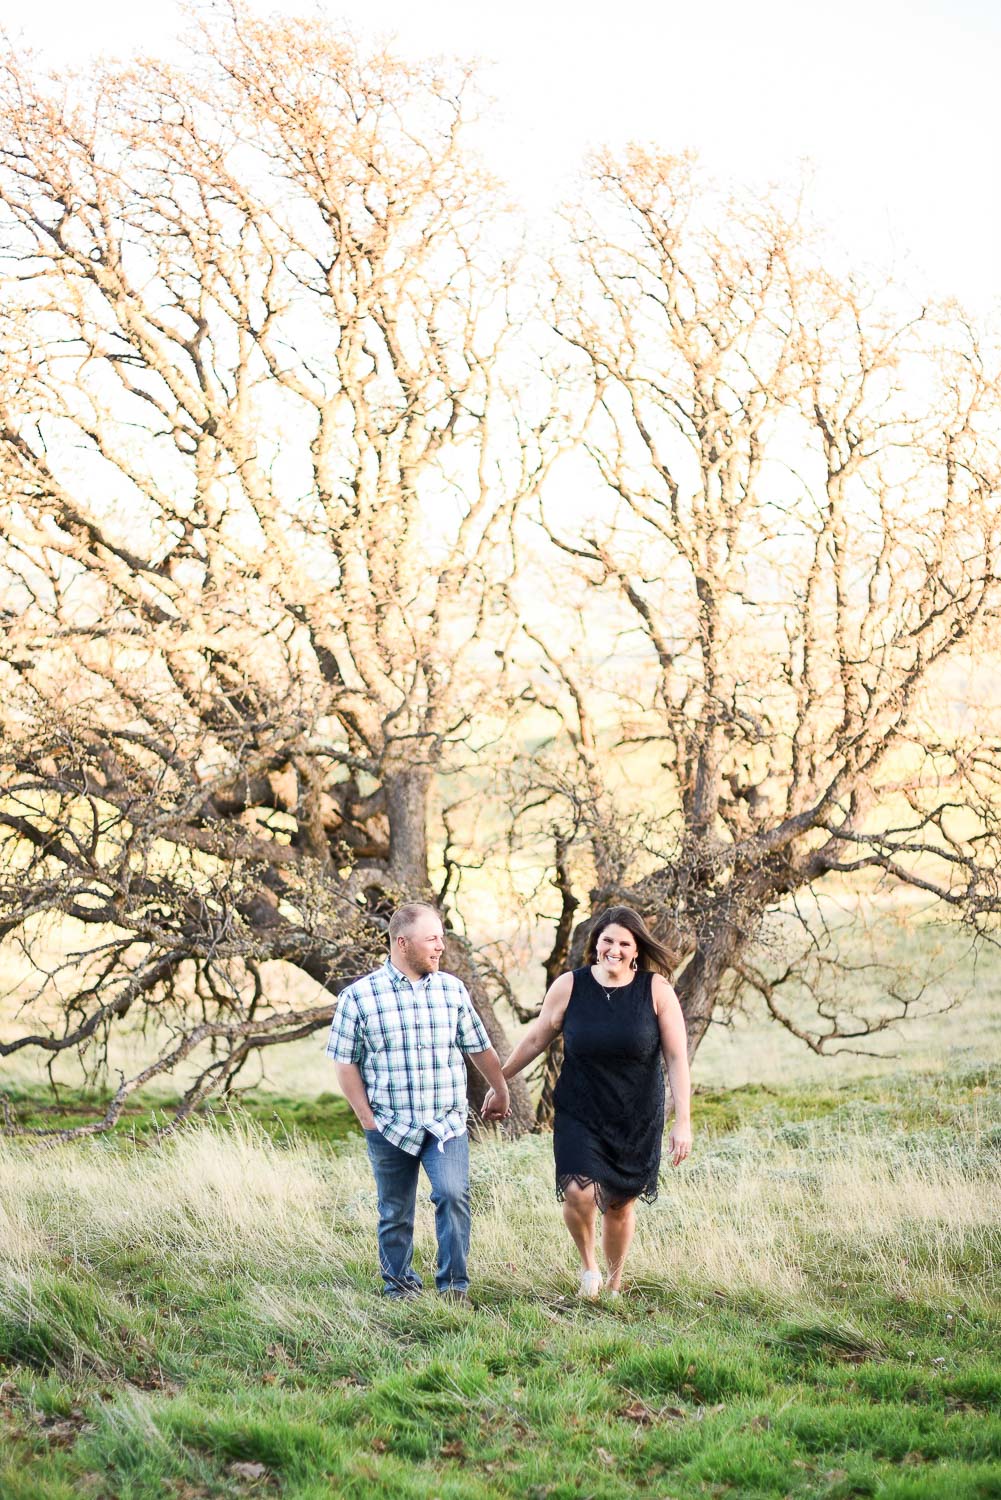 The Dalles Engagement Session